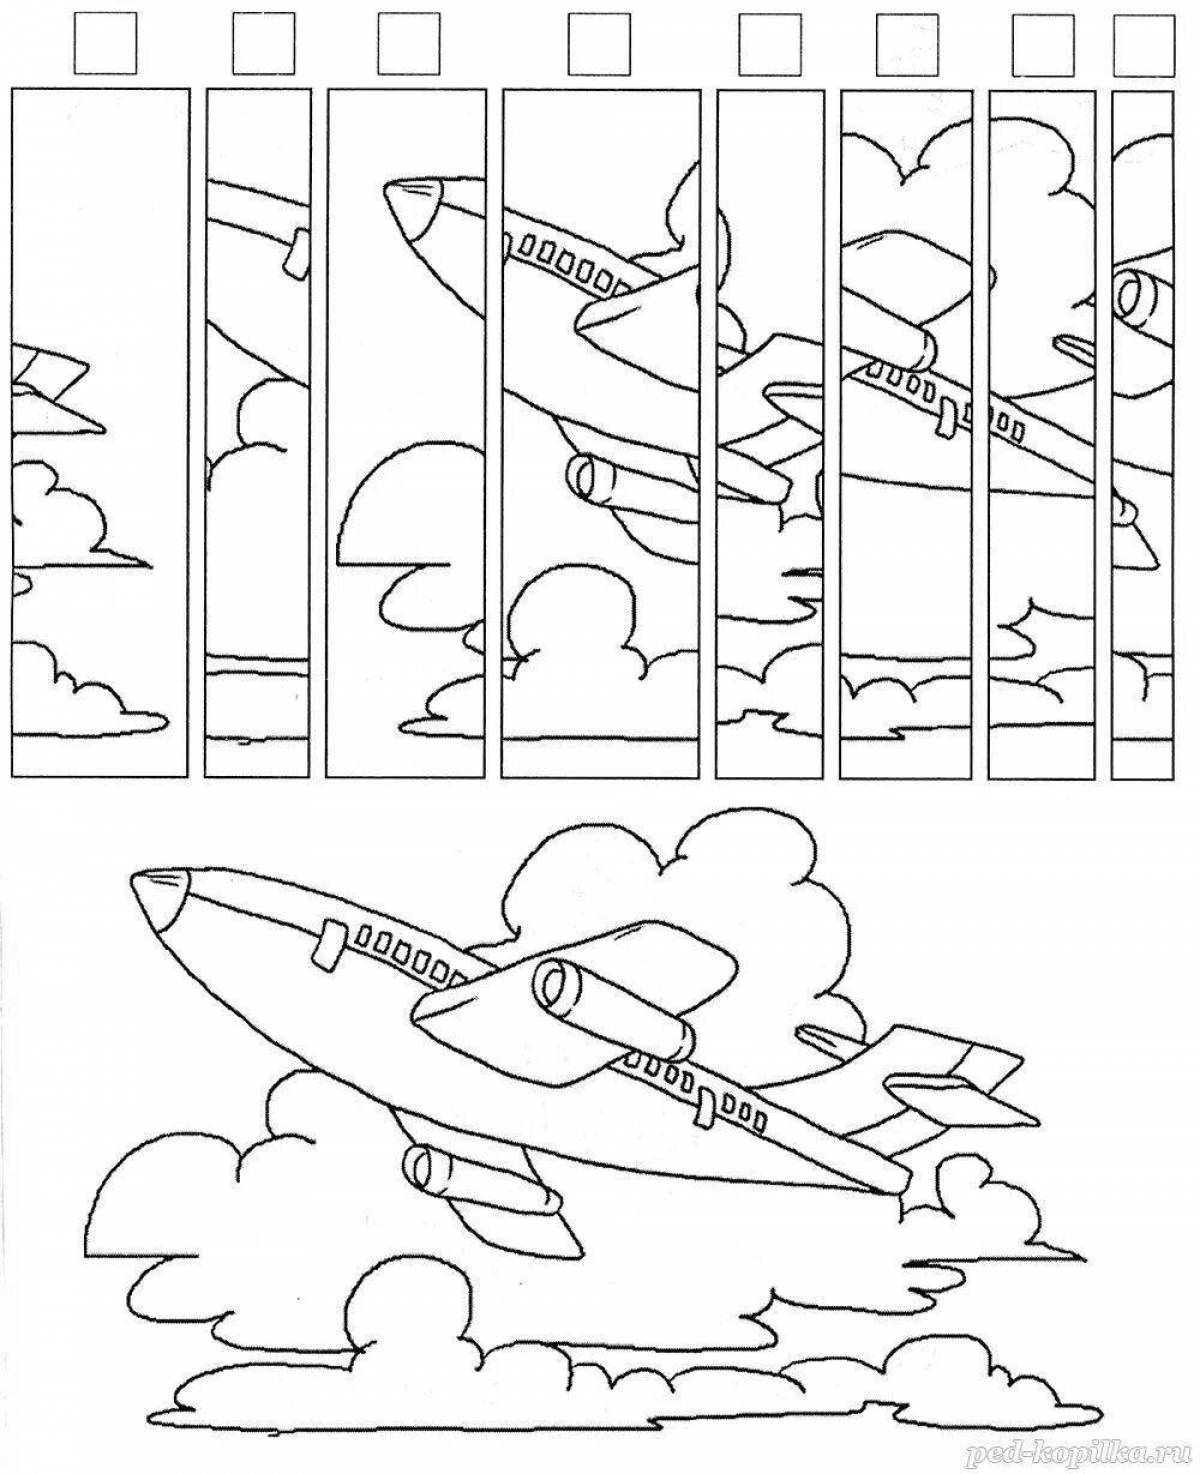 Inviting coloring in games for children 5 years old puzzles